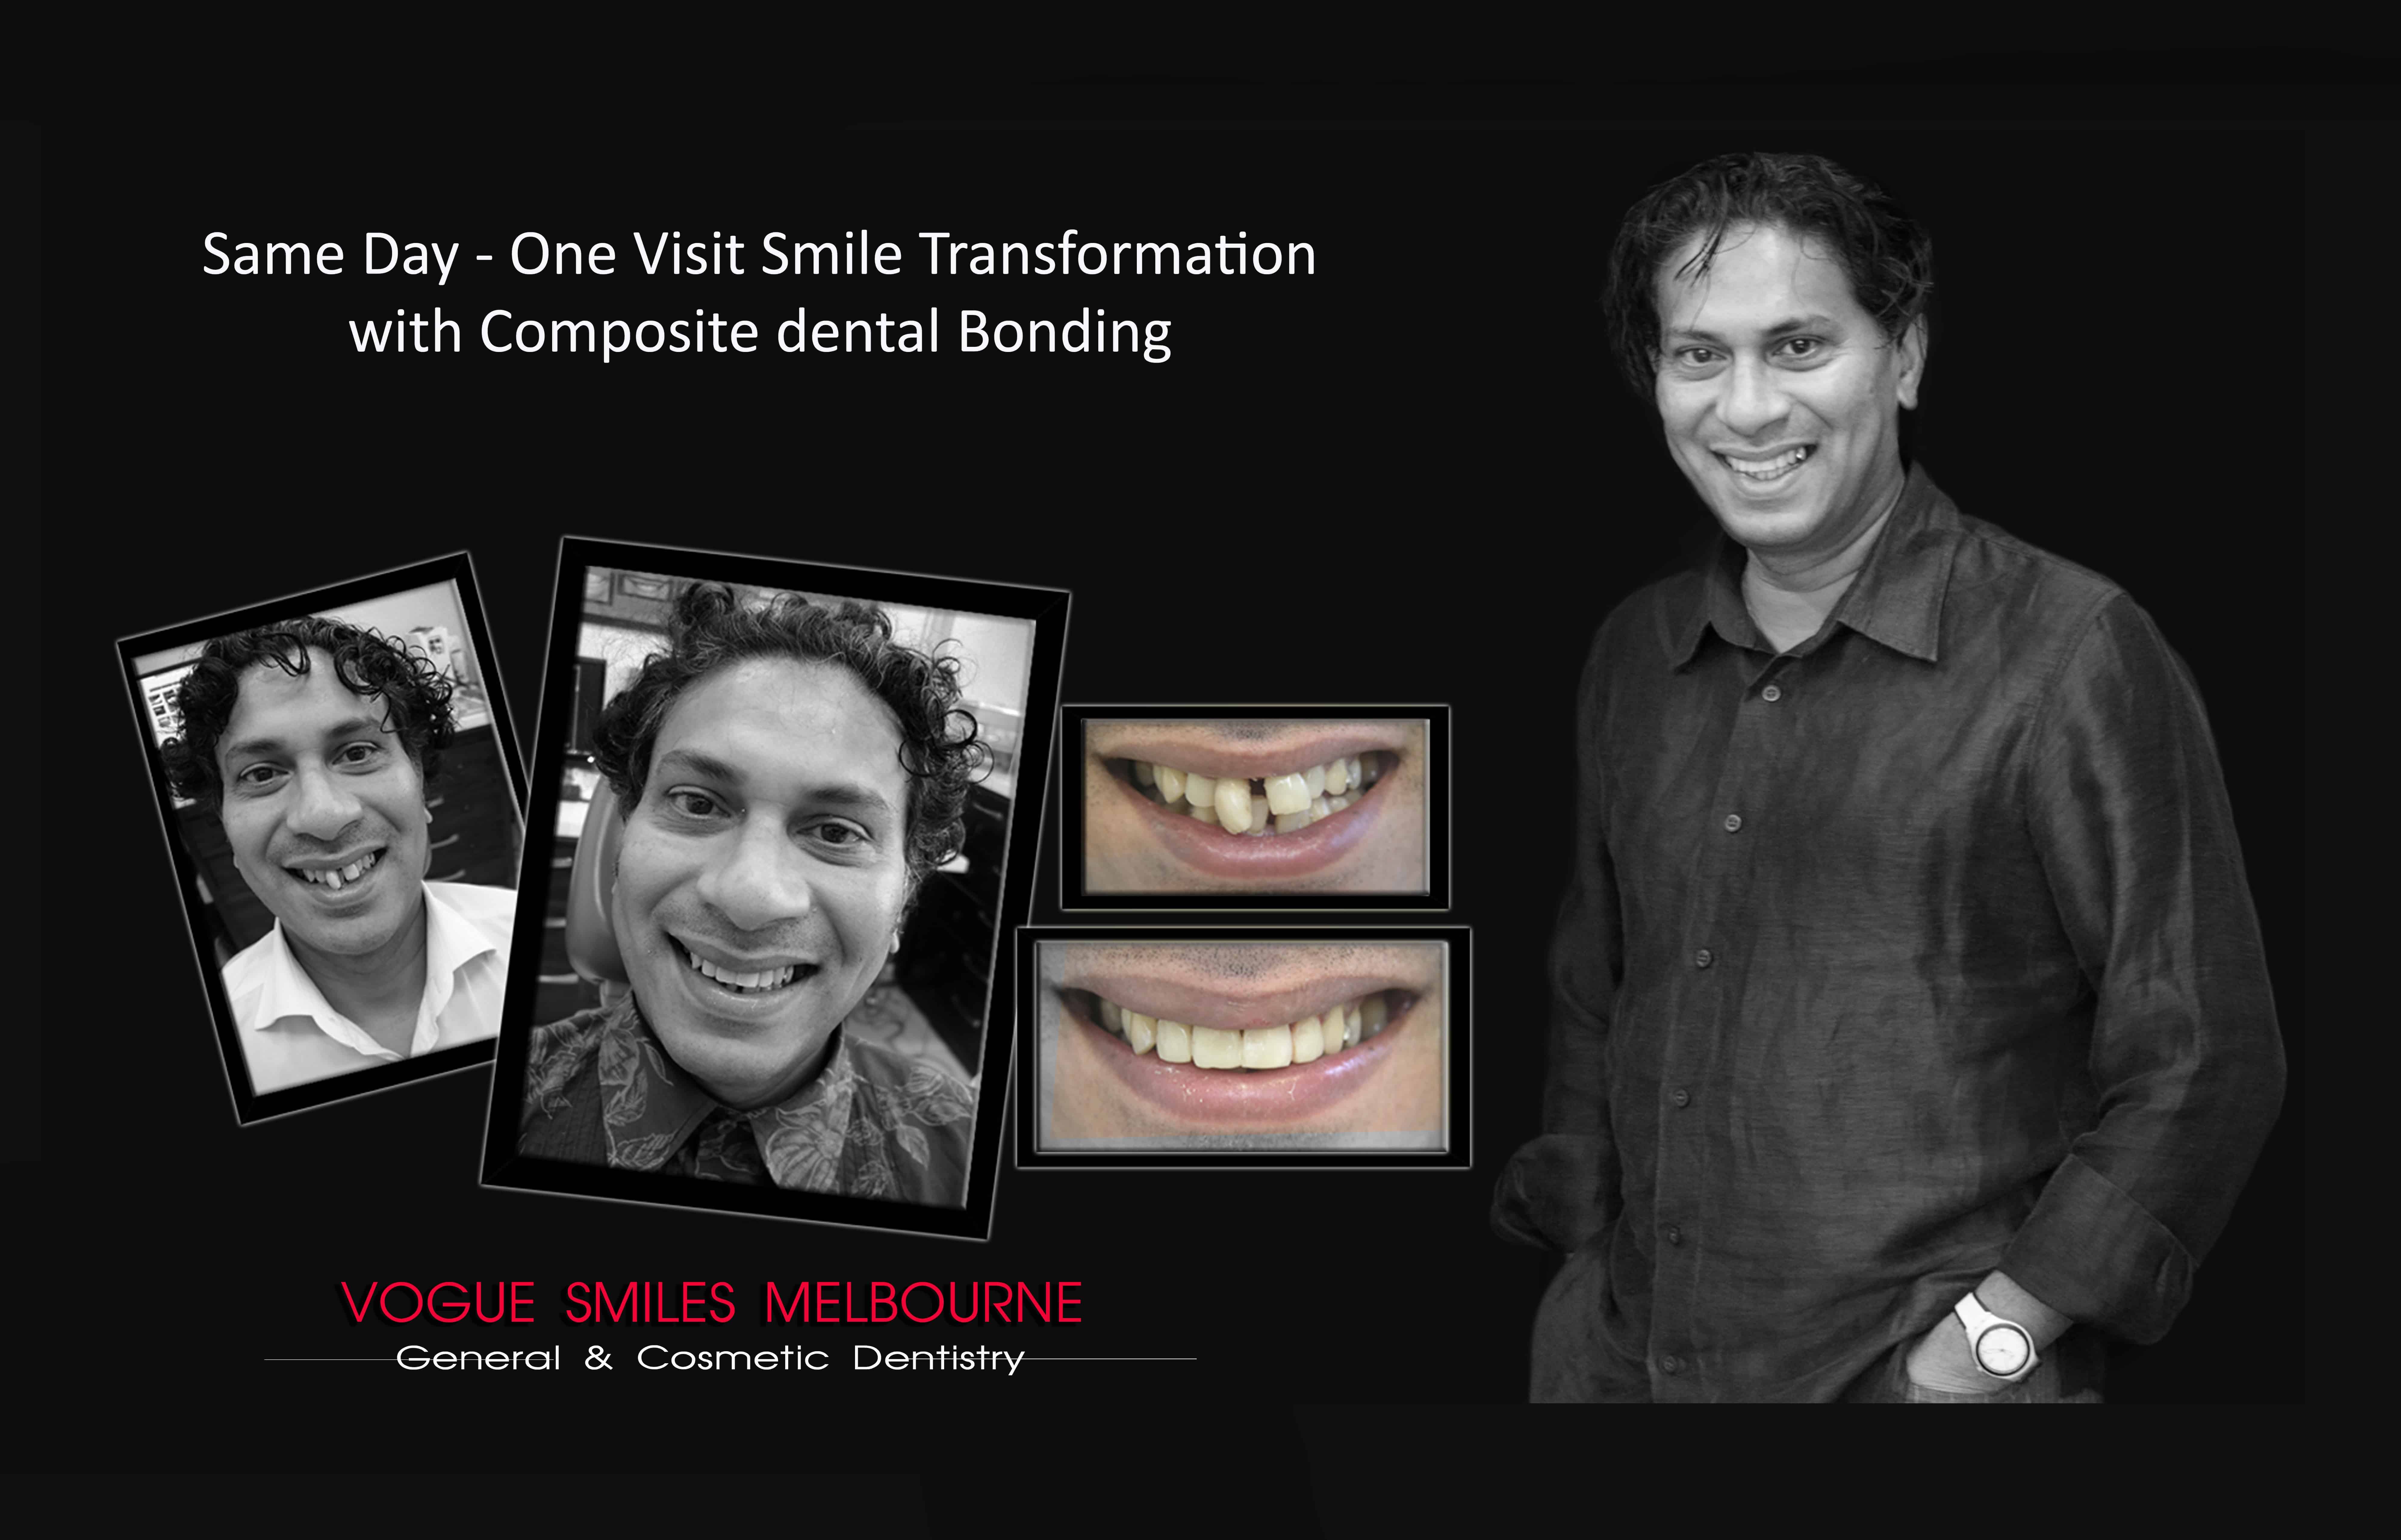 TRANSITIONAL SMILE MAKEOVER Melbourne CBD, Intermediate Cheapest most affordable Cosmetic Dentistry option to improve smile Melbourne Victoria Australia - Cosmetic Dentist Melbourne